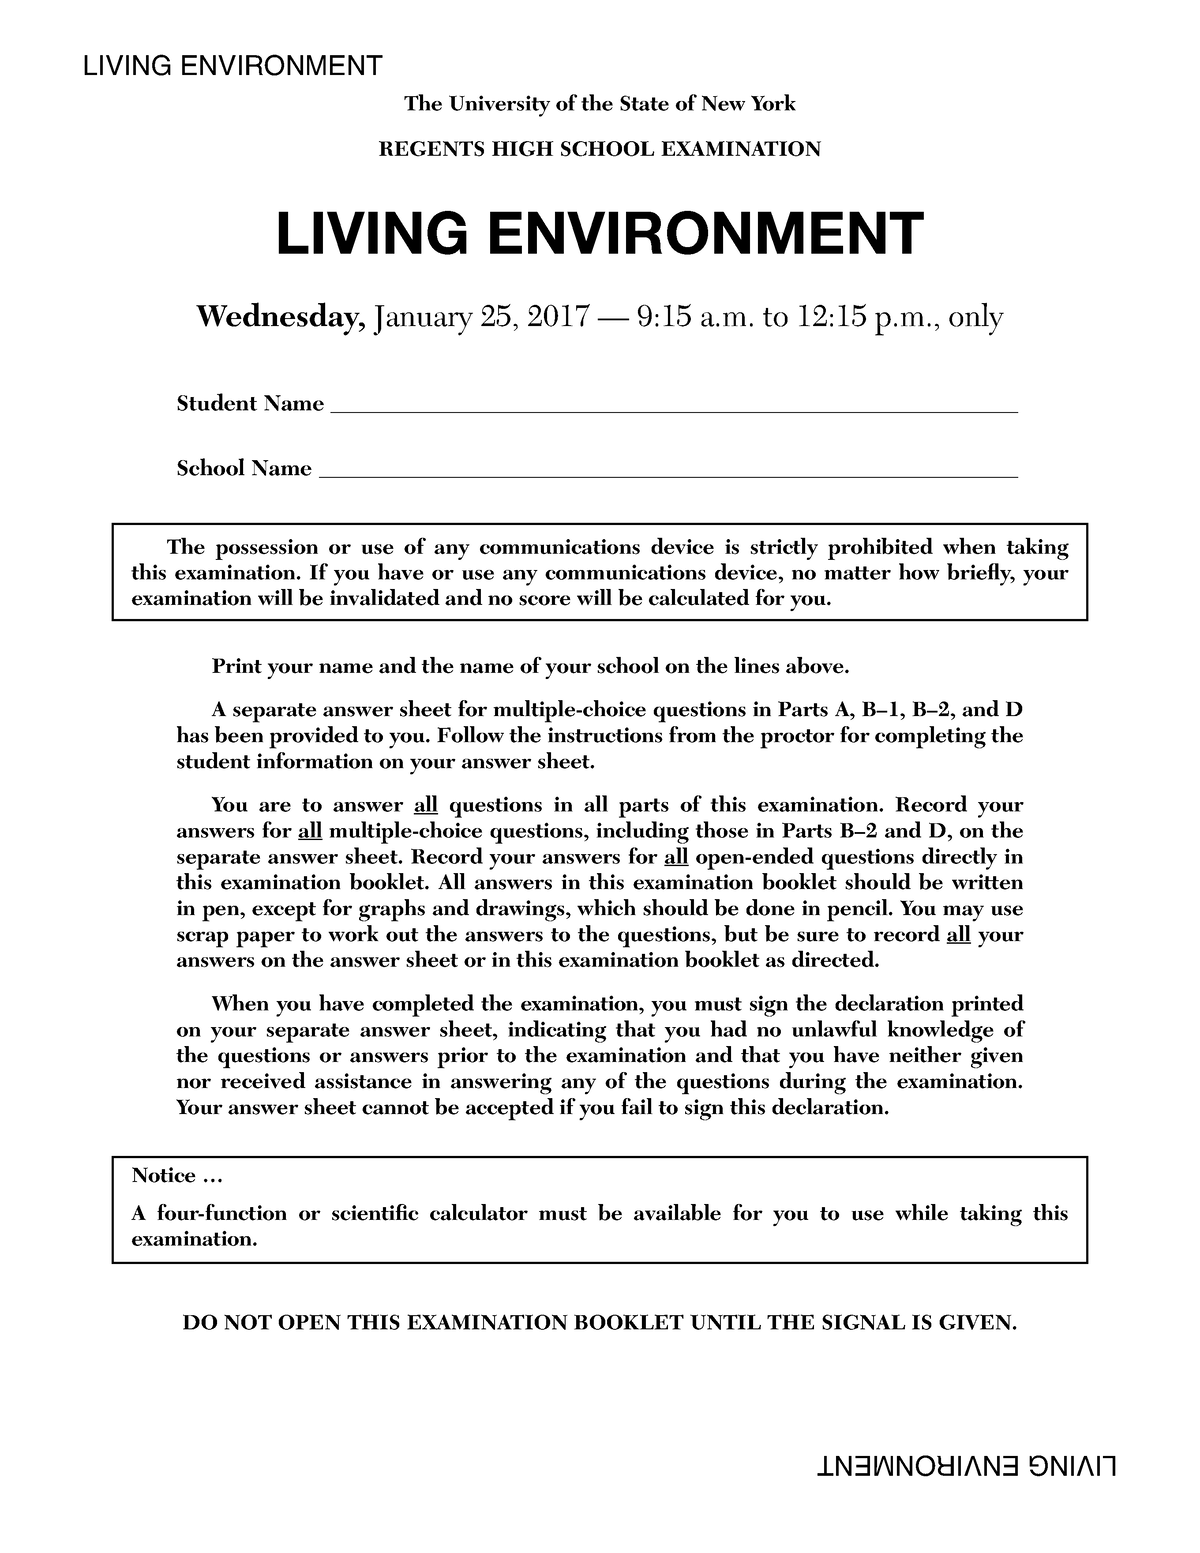 regents-exam-january-2017-living-environment-living-environment-the-university-of-the-state